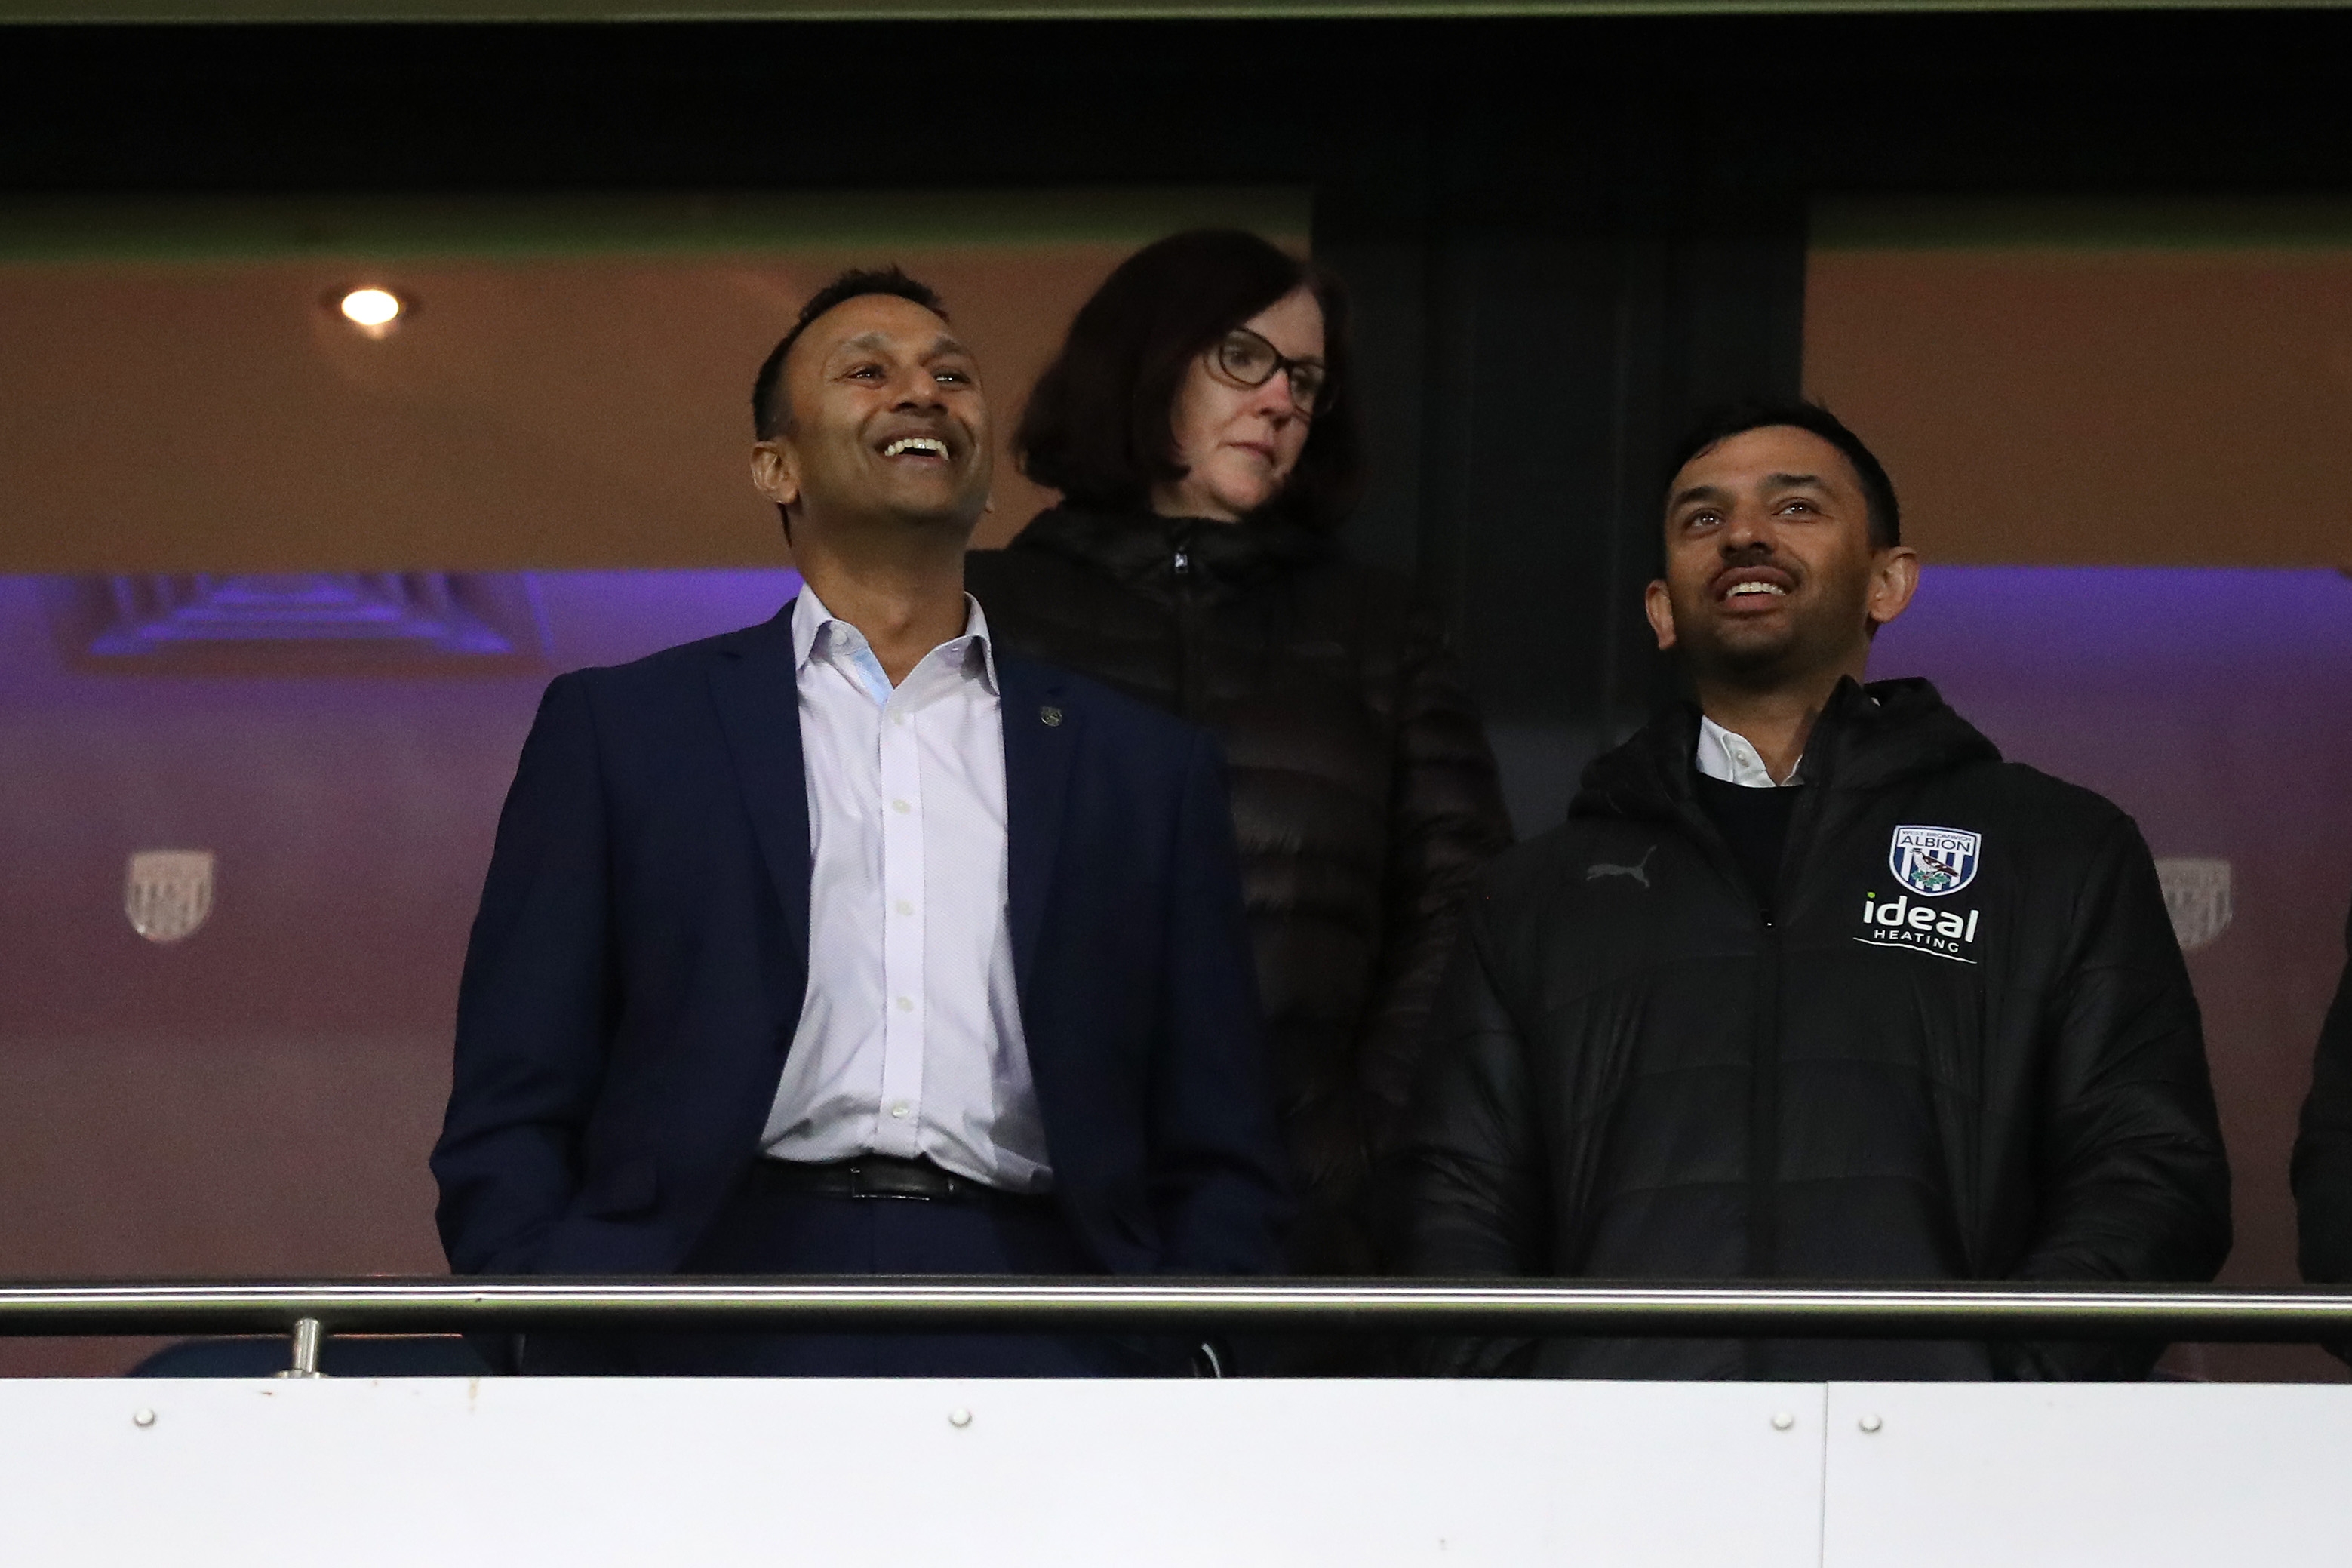 Shilen Patel stood in the directors balcony at The Hawthorns before the game against Rotherham